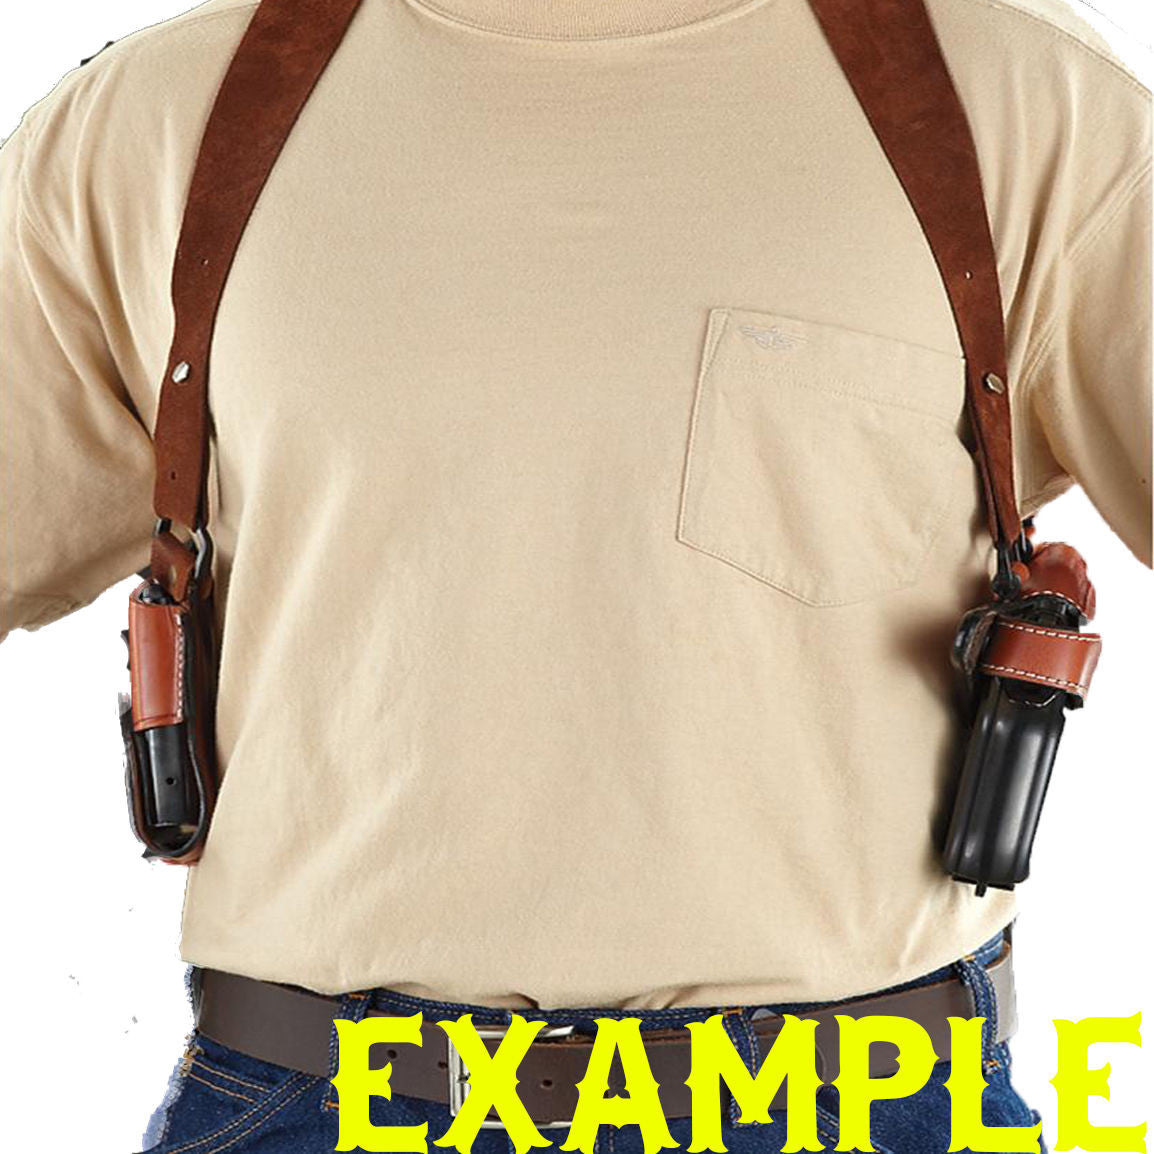 Shoulder Holster System with Double Mag Pouch for Smith & Wesson M&P 45 4.5"